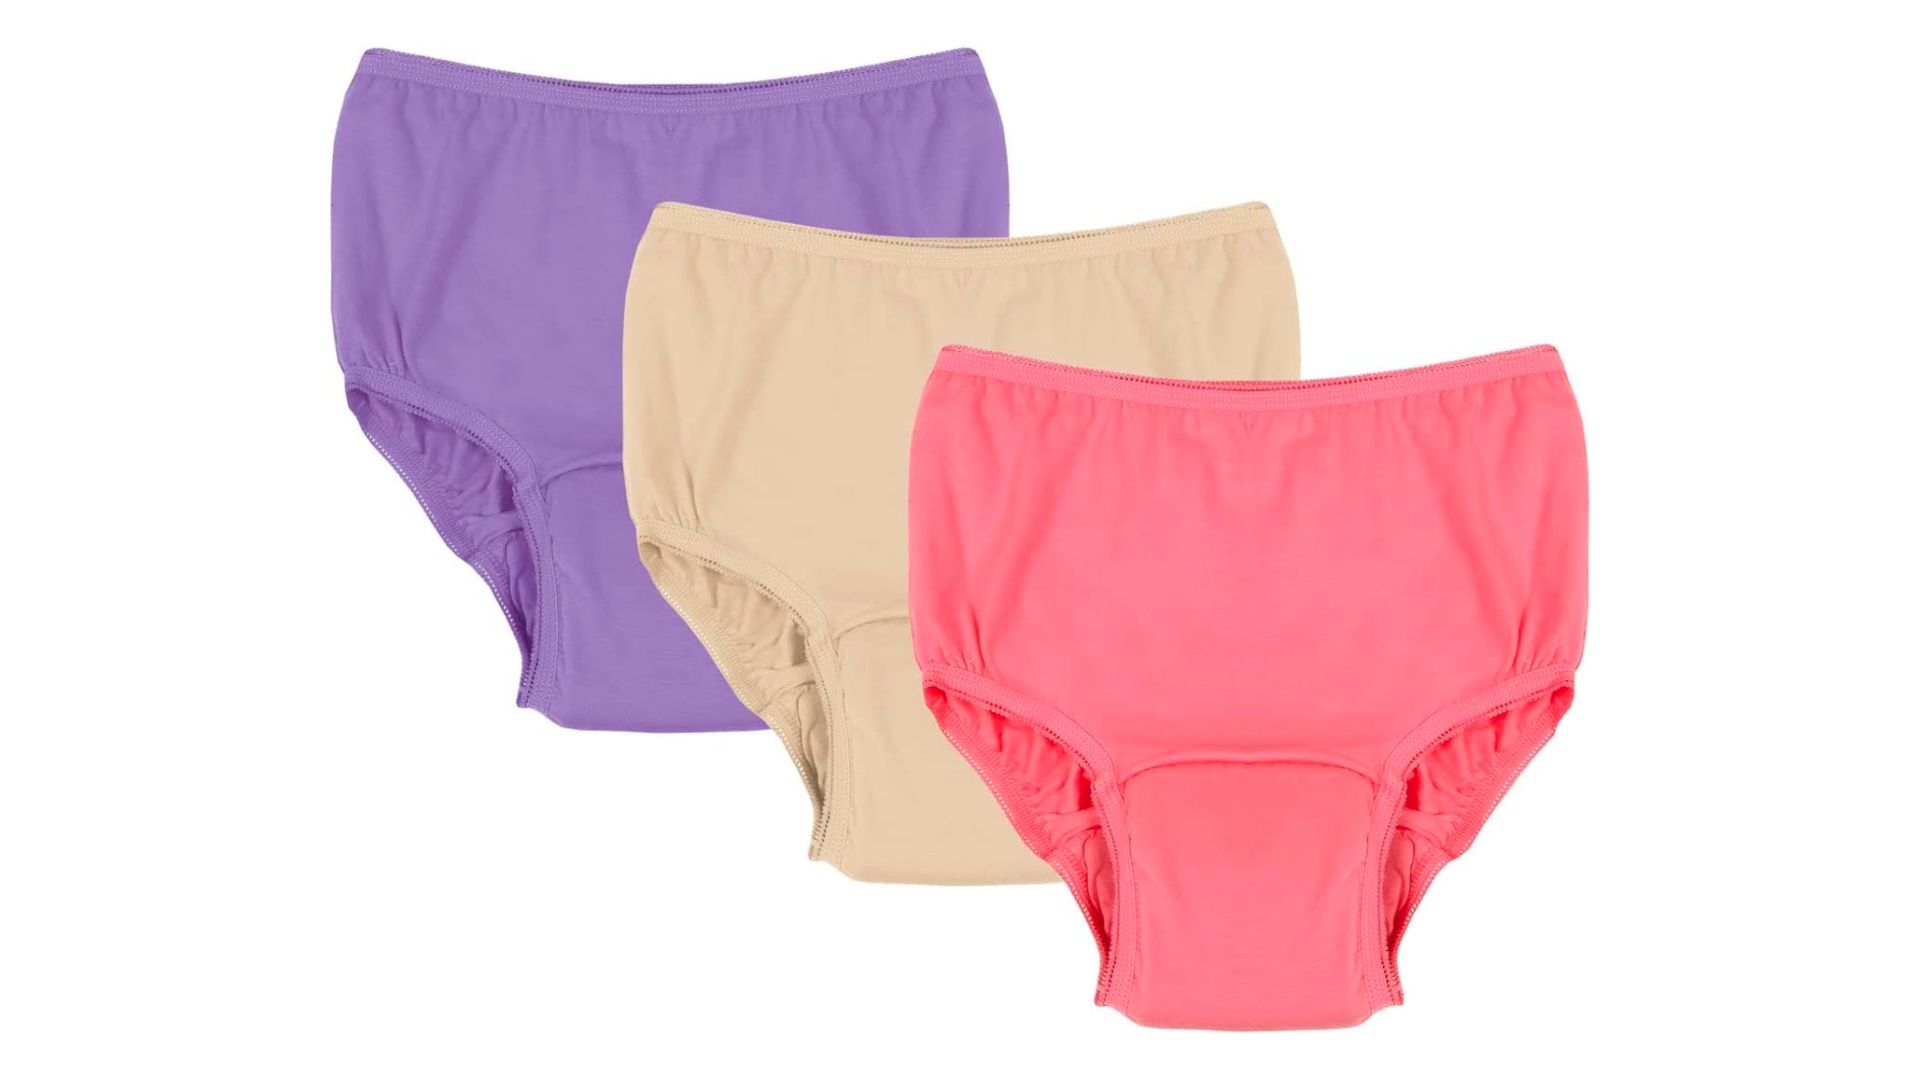 Everdries Leakproof Underwear for Women Incontinence,Leak Proof